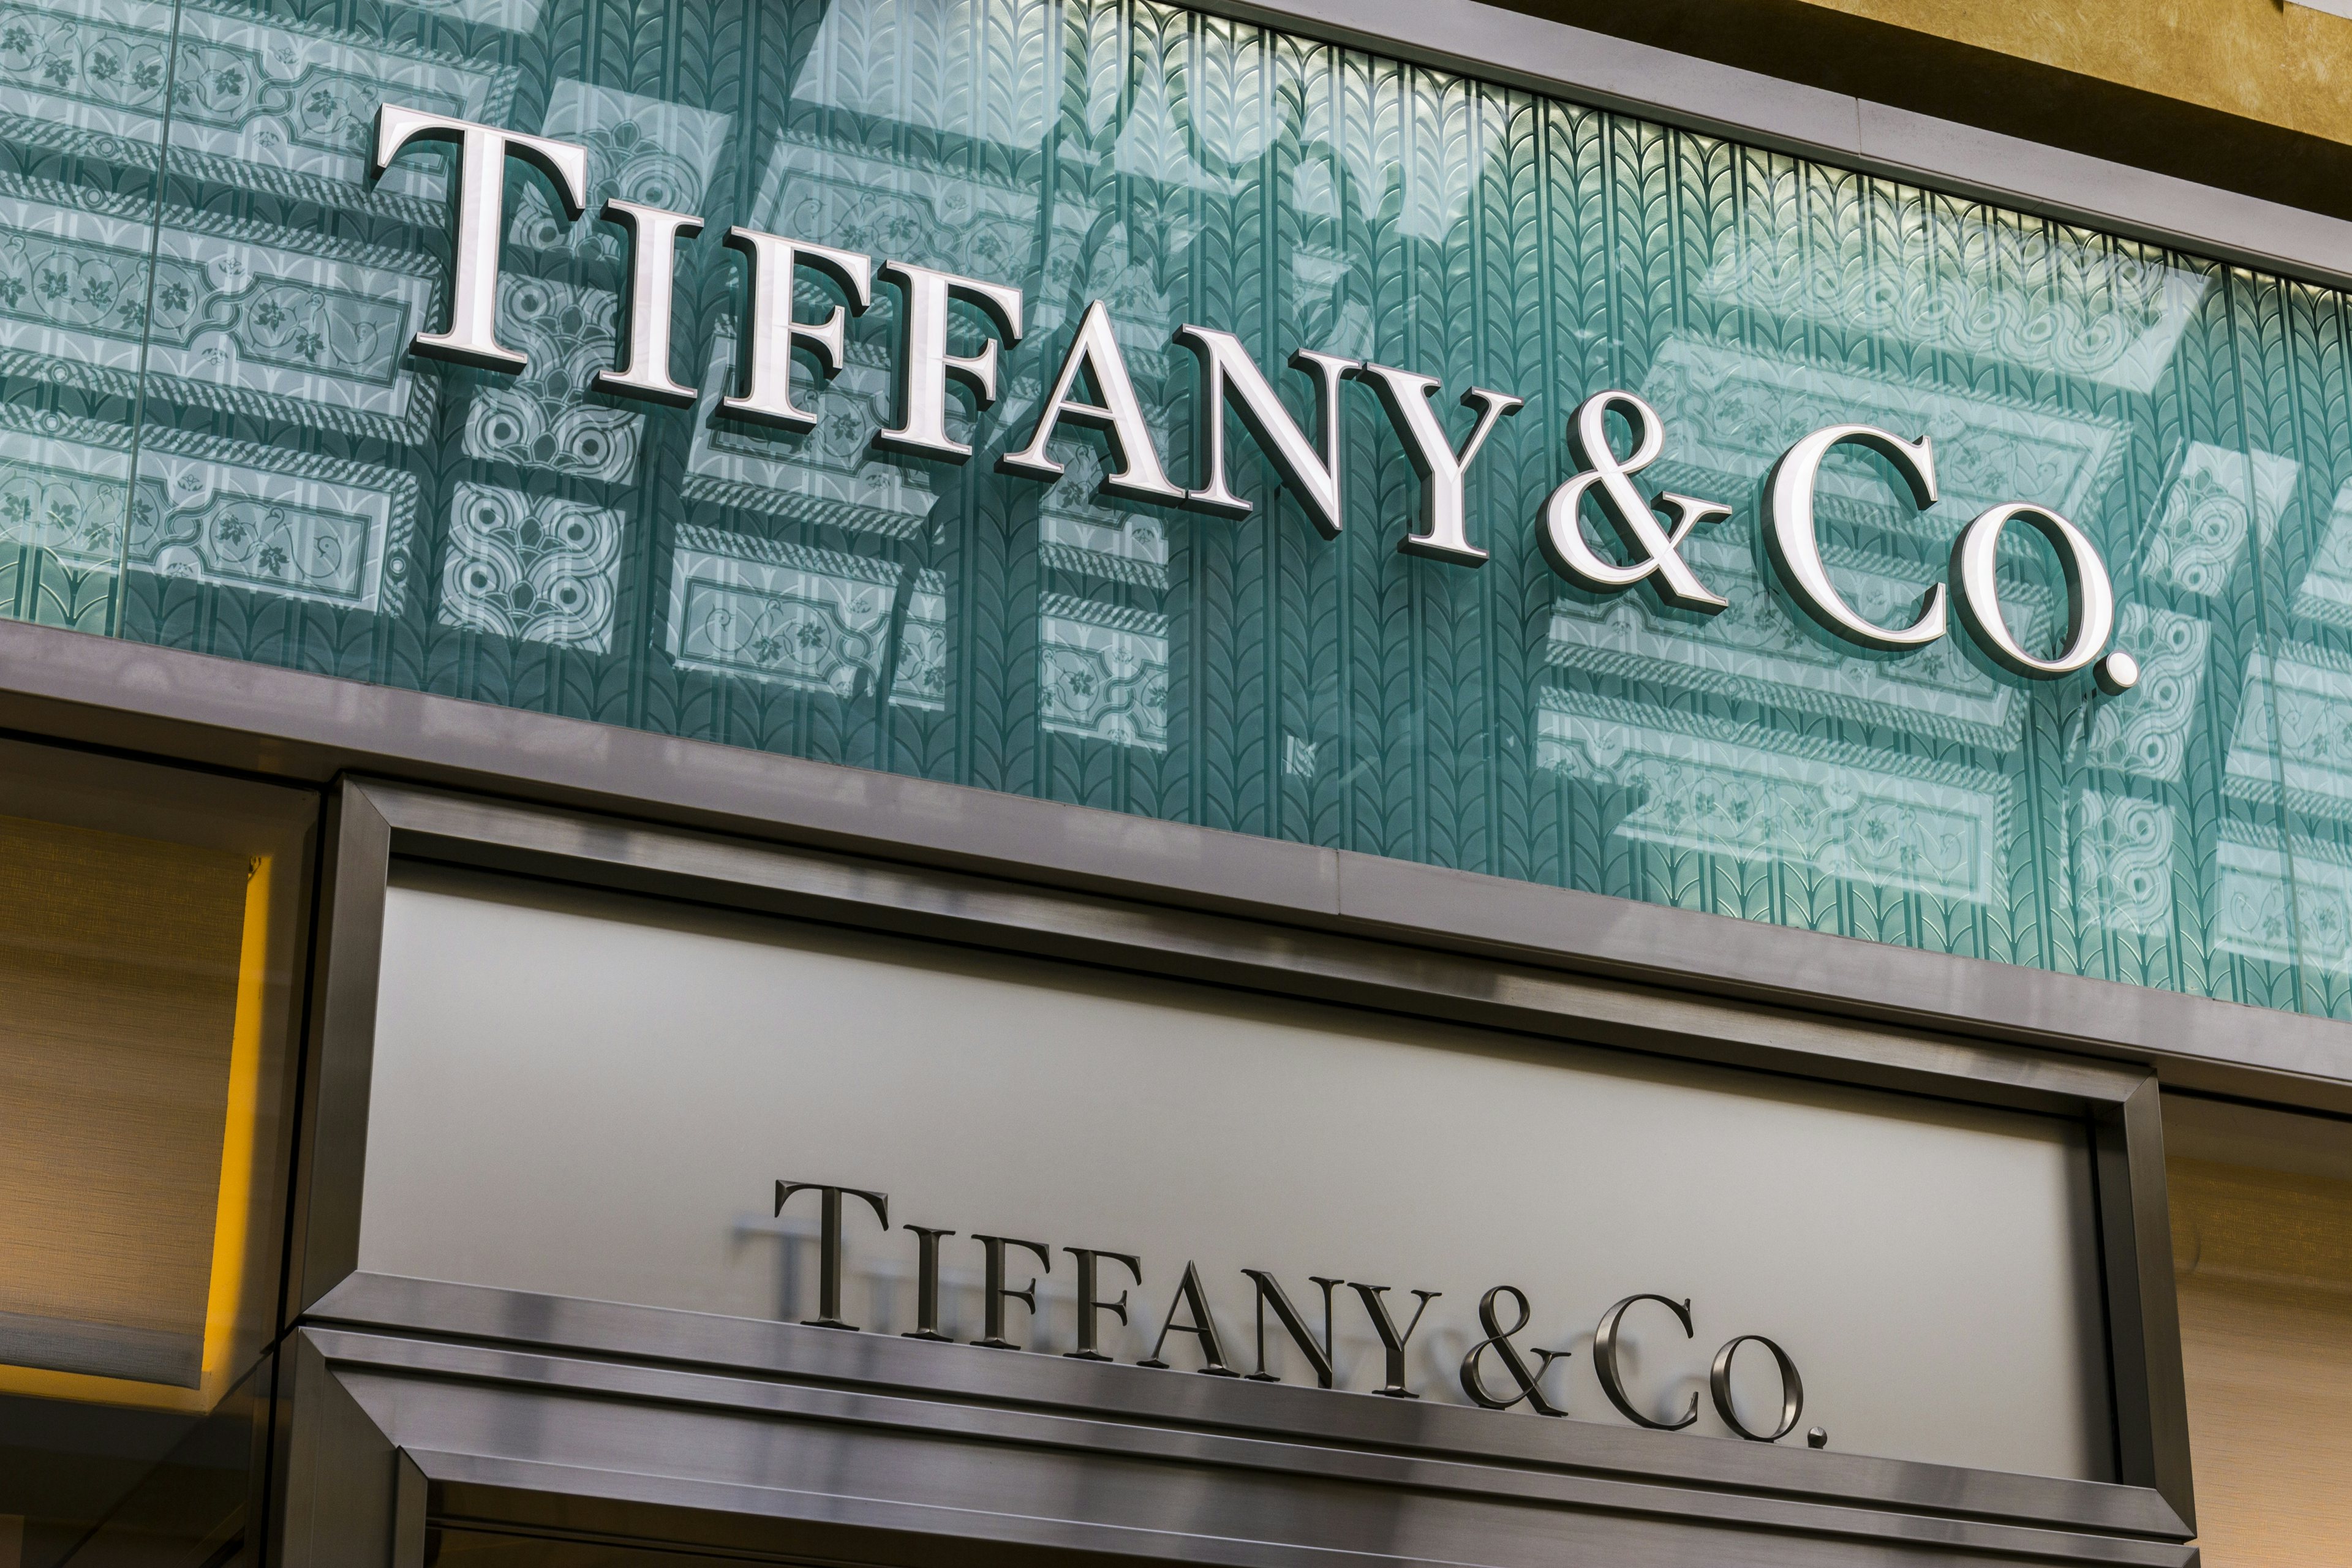 Tiffany & Co. is among the American consumer brands with the most exposure to China. (Jonathan Weiss/Shutterstock)